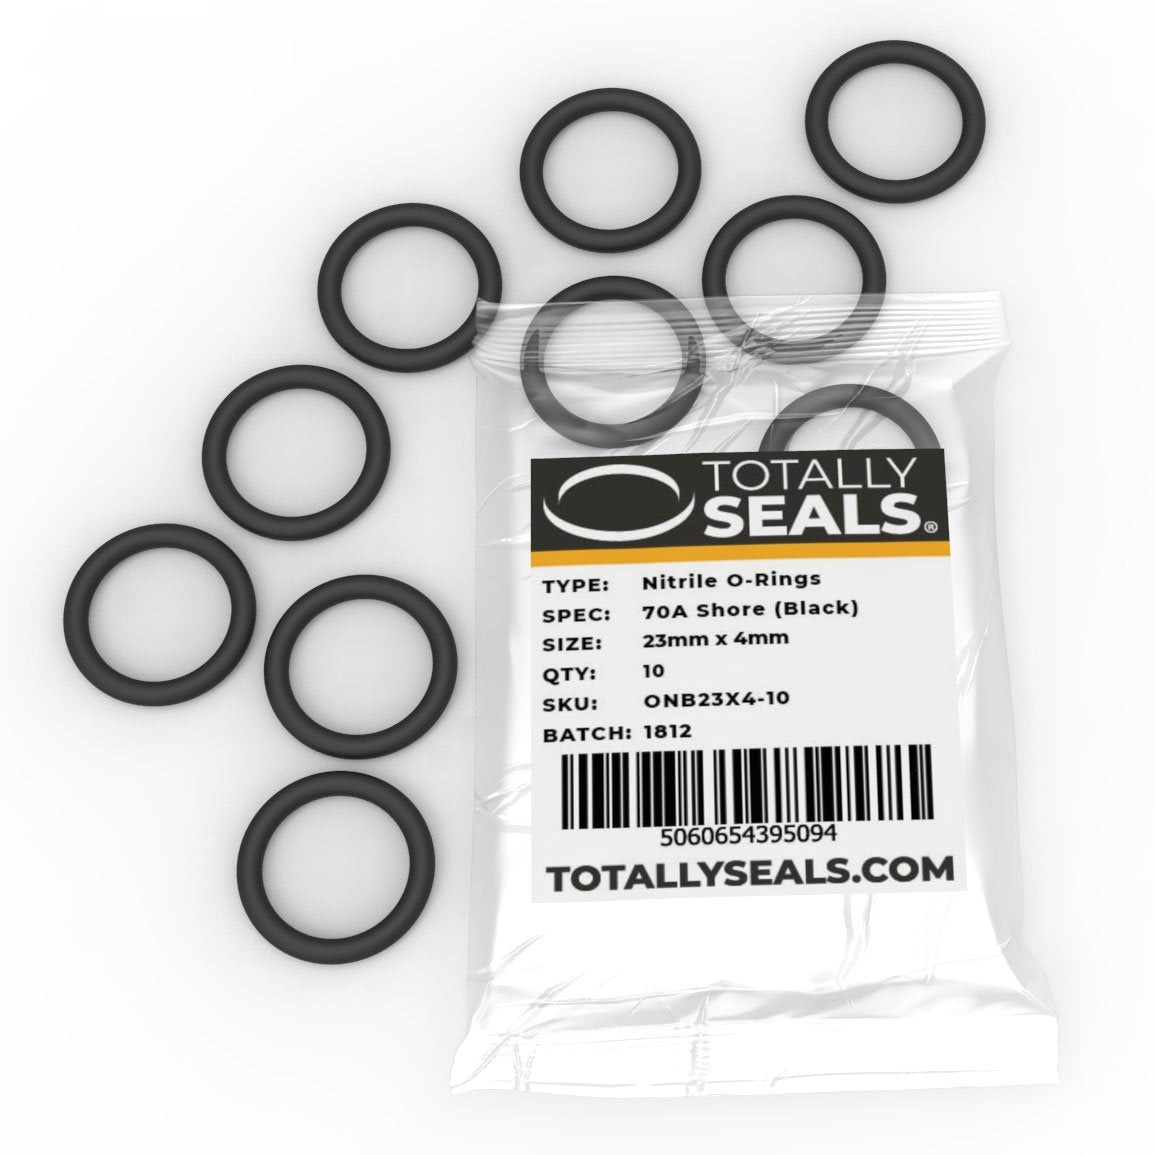 23mm x 4mm (31mm OD) Nitrile O-Rings - Totally Seals®